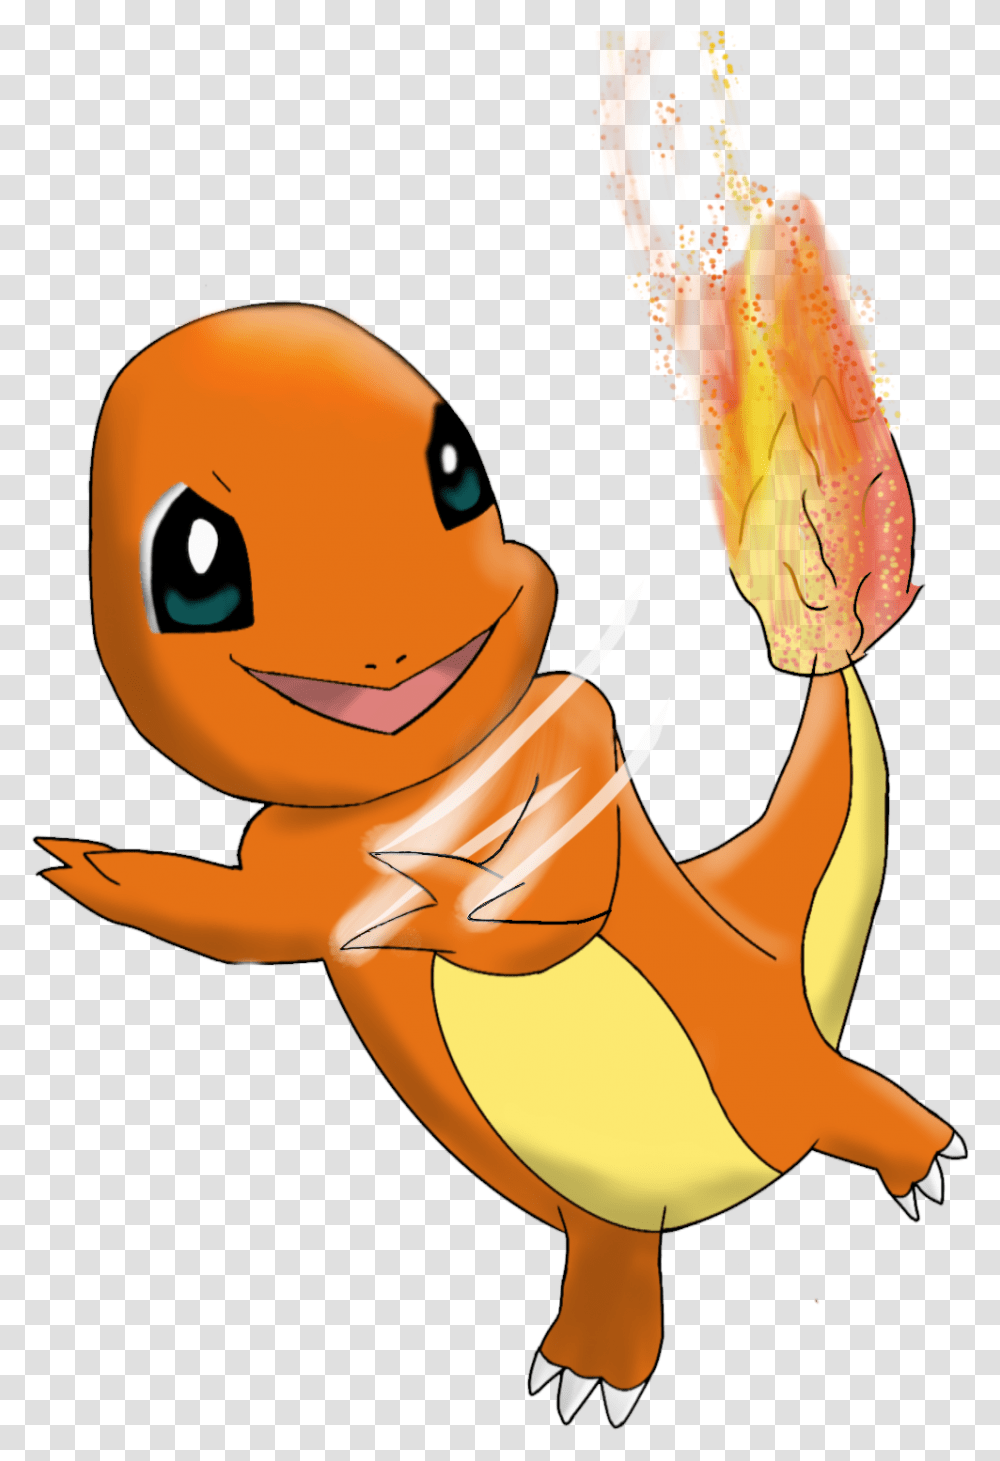 Charmander Used Scratch By Crazyinfin8 Charmander Attack Scratch, Animal, Toy Transparent Png